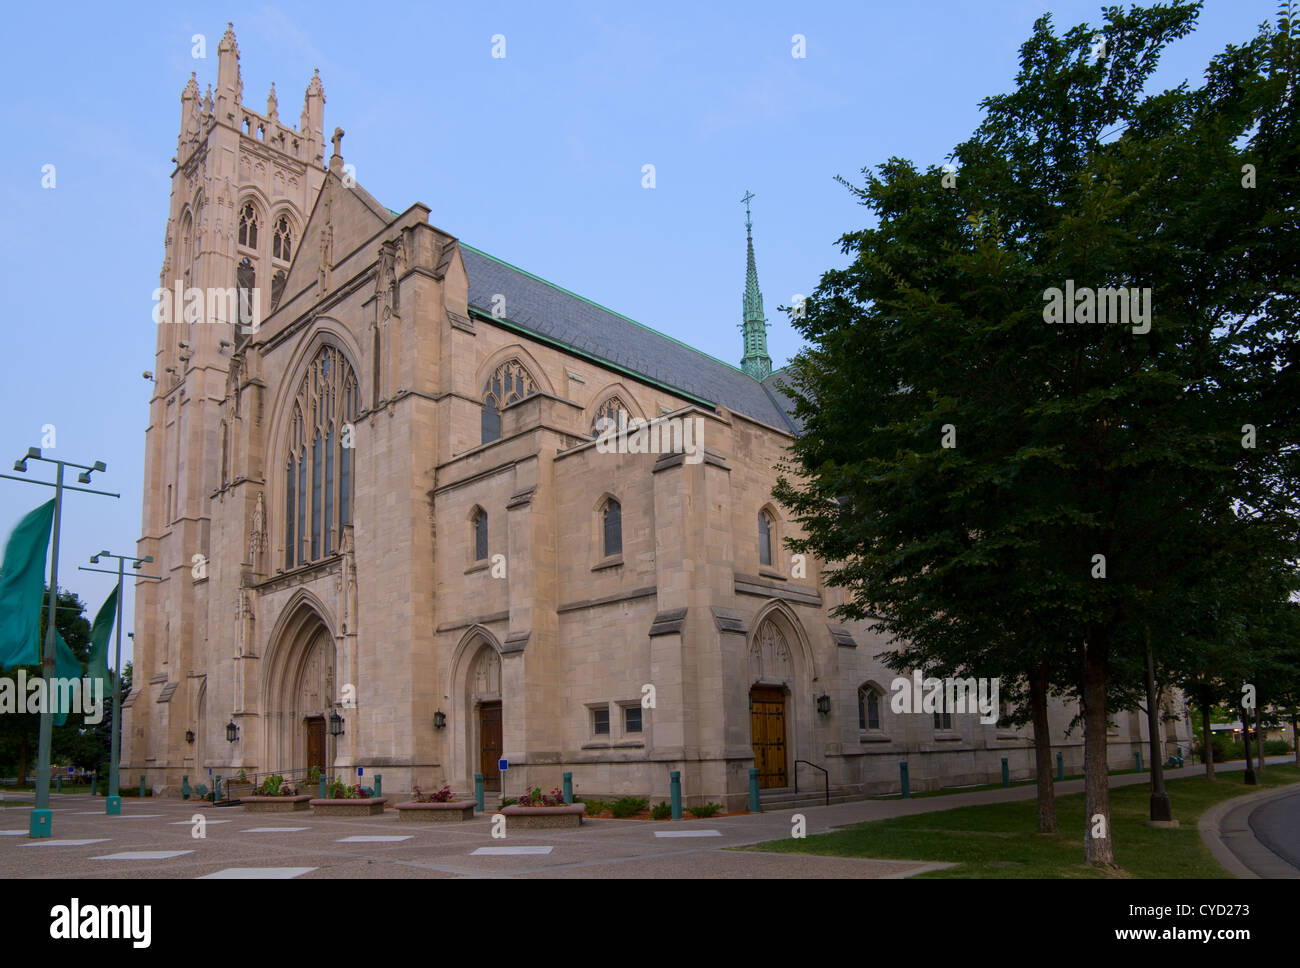 Facade of neo gothic lutheran church in Minneapolis with bell tower Stock Photo